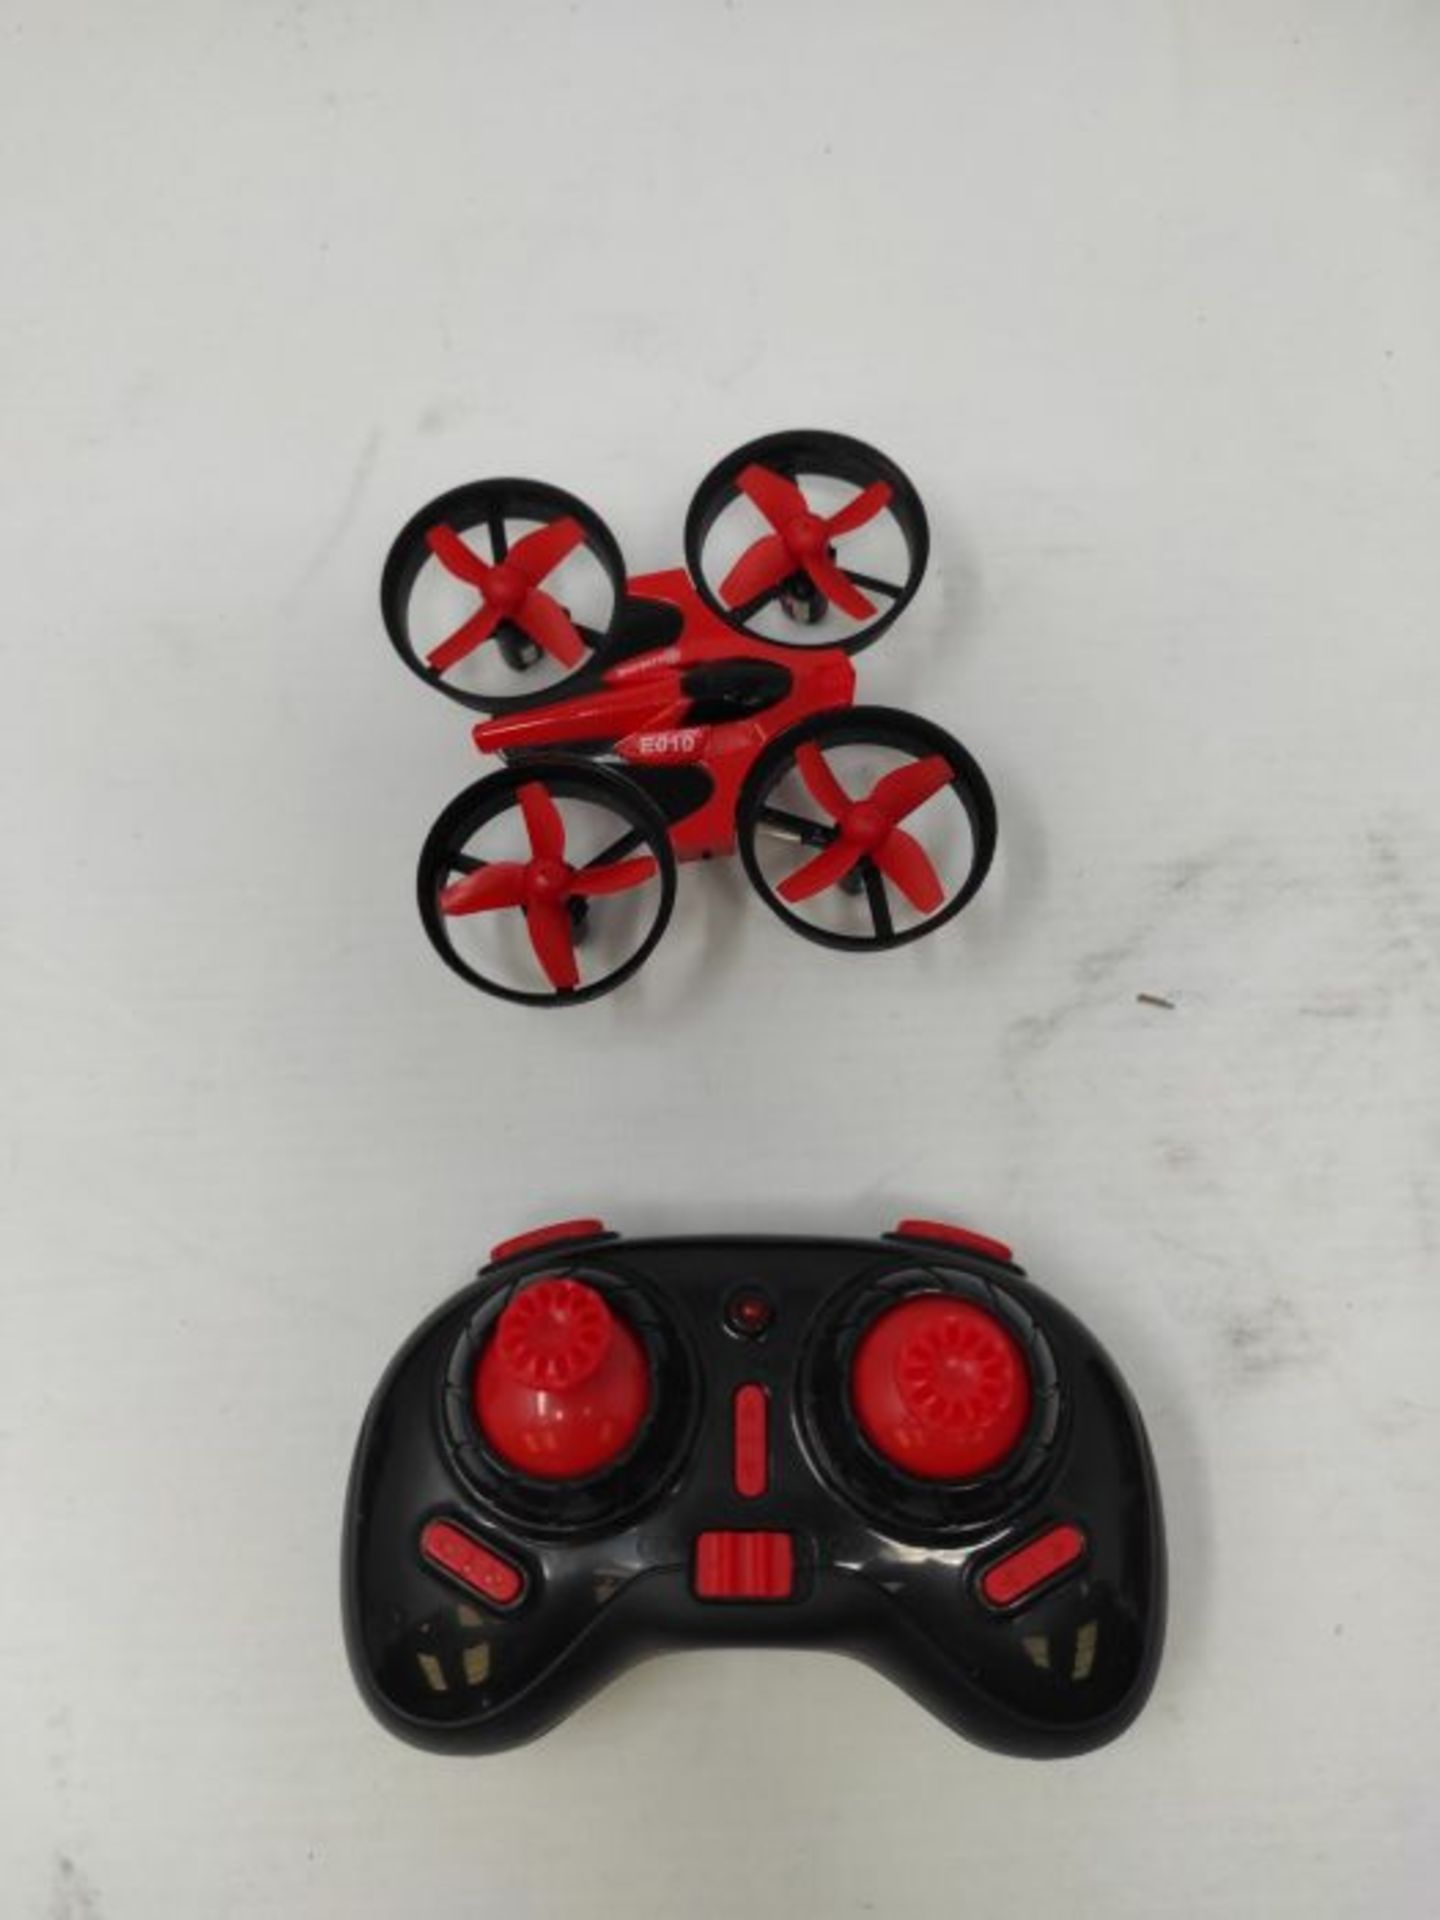 Revell Control 23823 Fizz RC Quadcopter, Red - Image 3 of 3